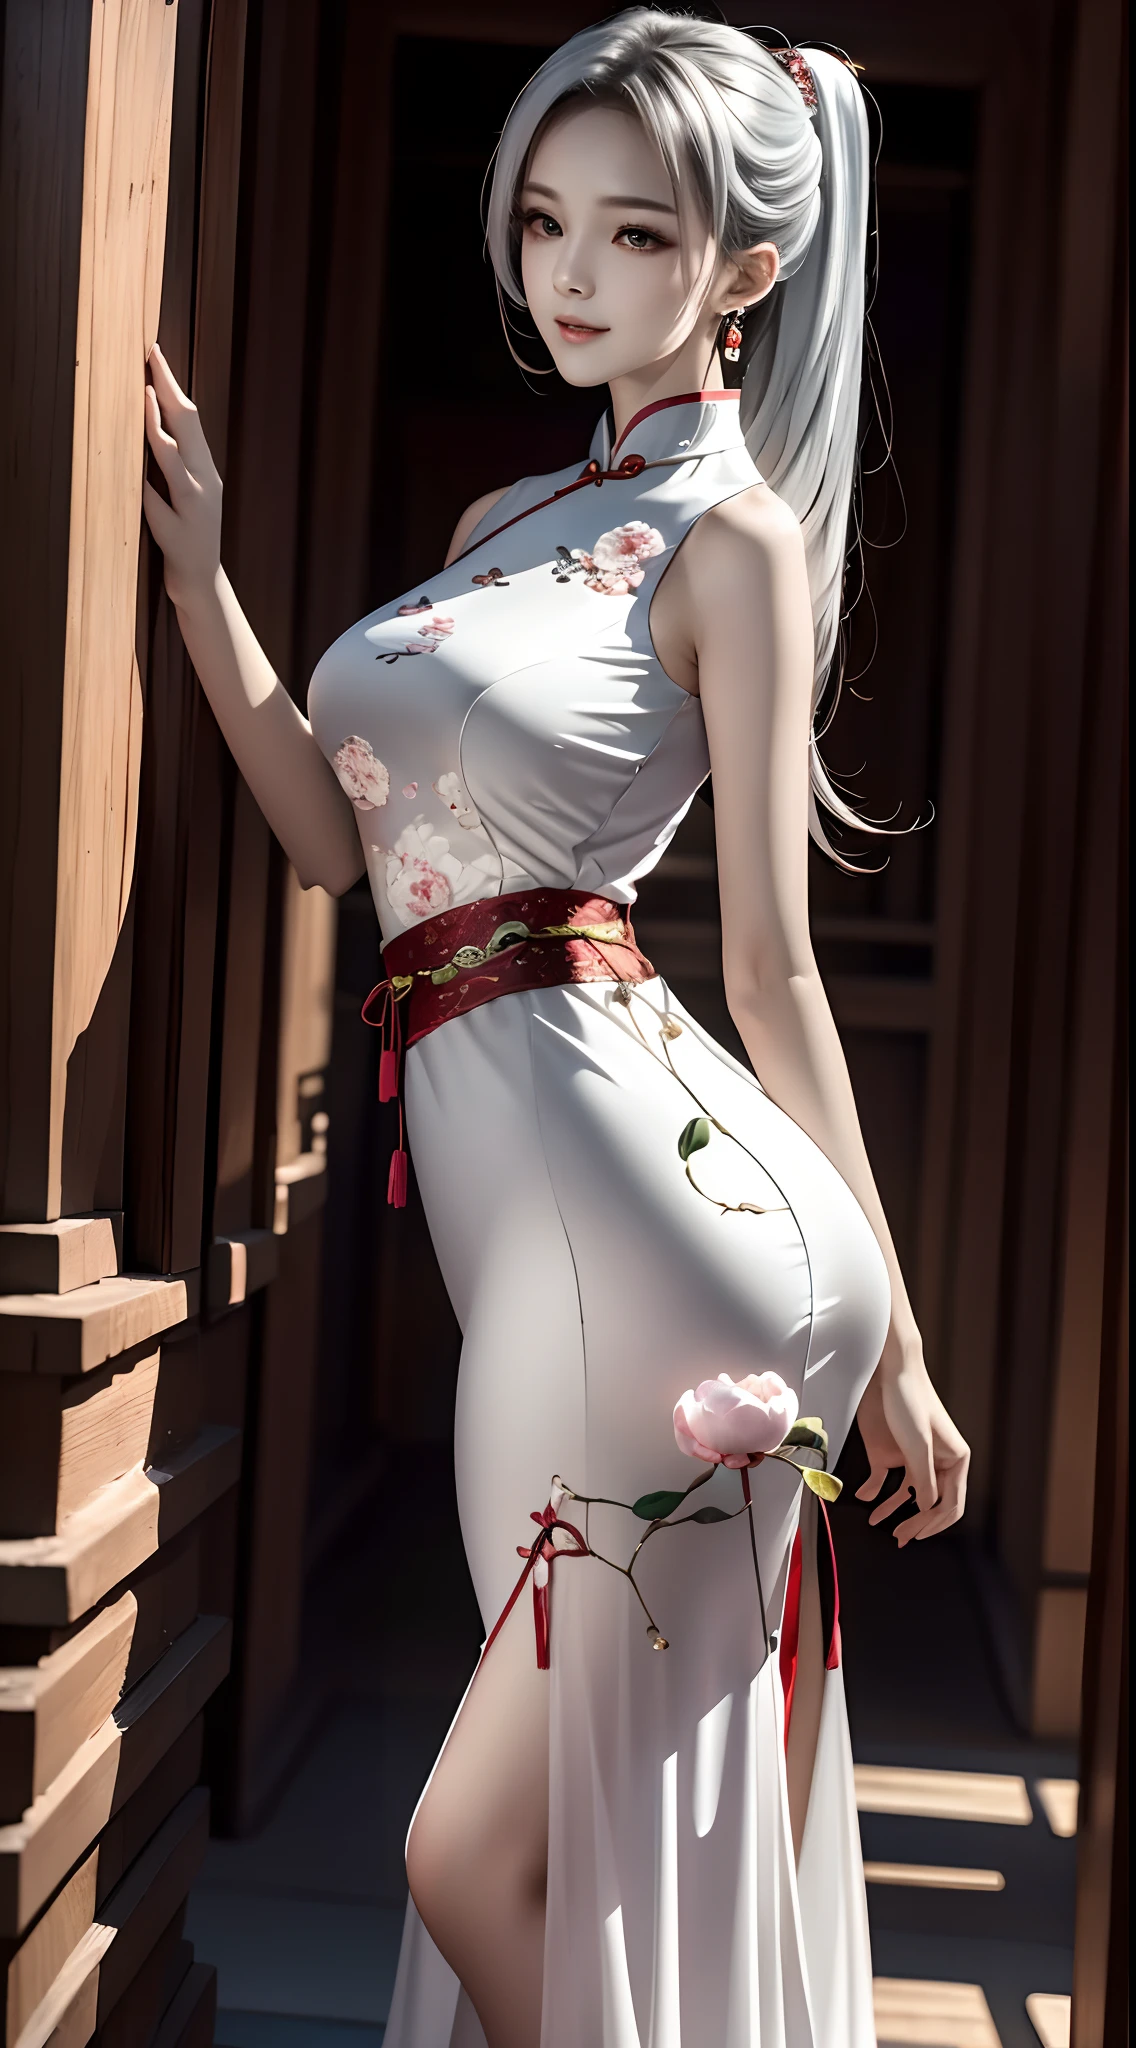 long layered silvery white hair，High ponytail，Delicate and bright hair color，Delicate and perfect face，The corners of the eyes are slightly red，ssmile，upturned corners of the mouth，Peony pattern cheongsam design，Raised skirt，Delicate long legs，The skin texture is delicate，leaning back against the wall，Cinematic gloss，Best quality photos 16k high resolution。